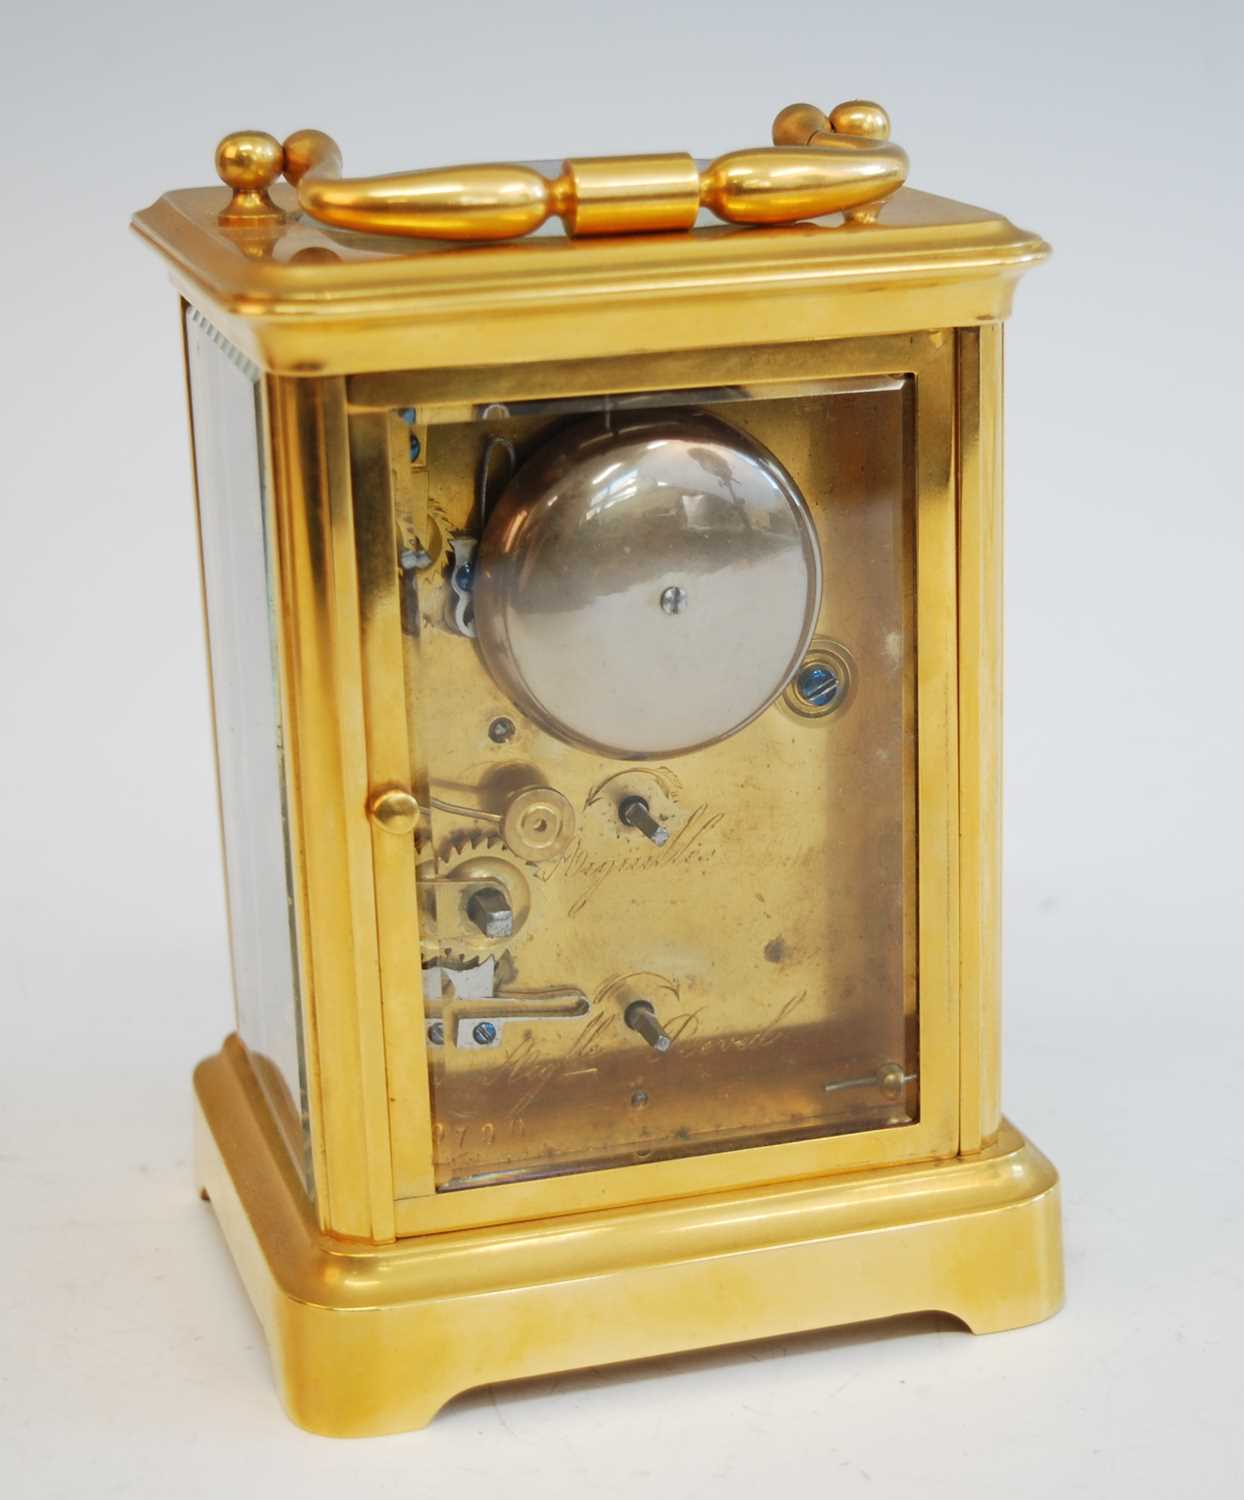 A late 19th century French lacquered brass carriage clock with alarm, having white enamel Roman dial - Image 5 of 6